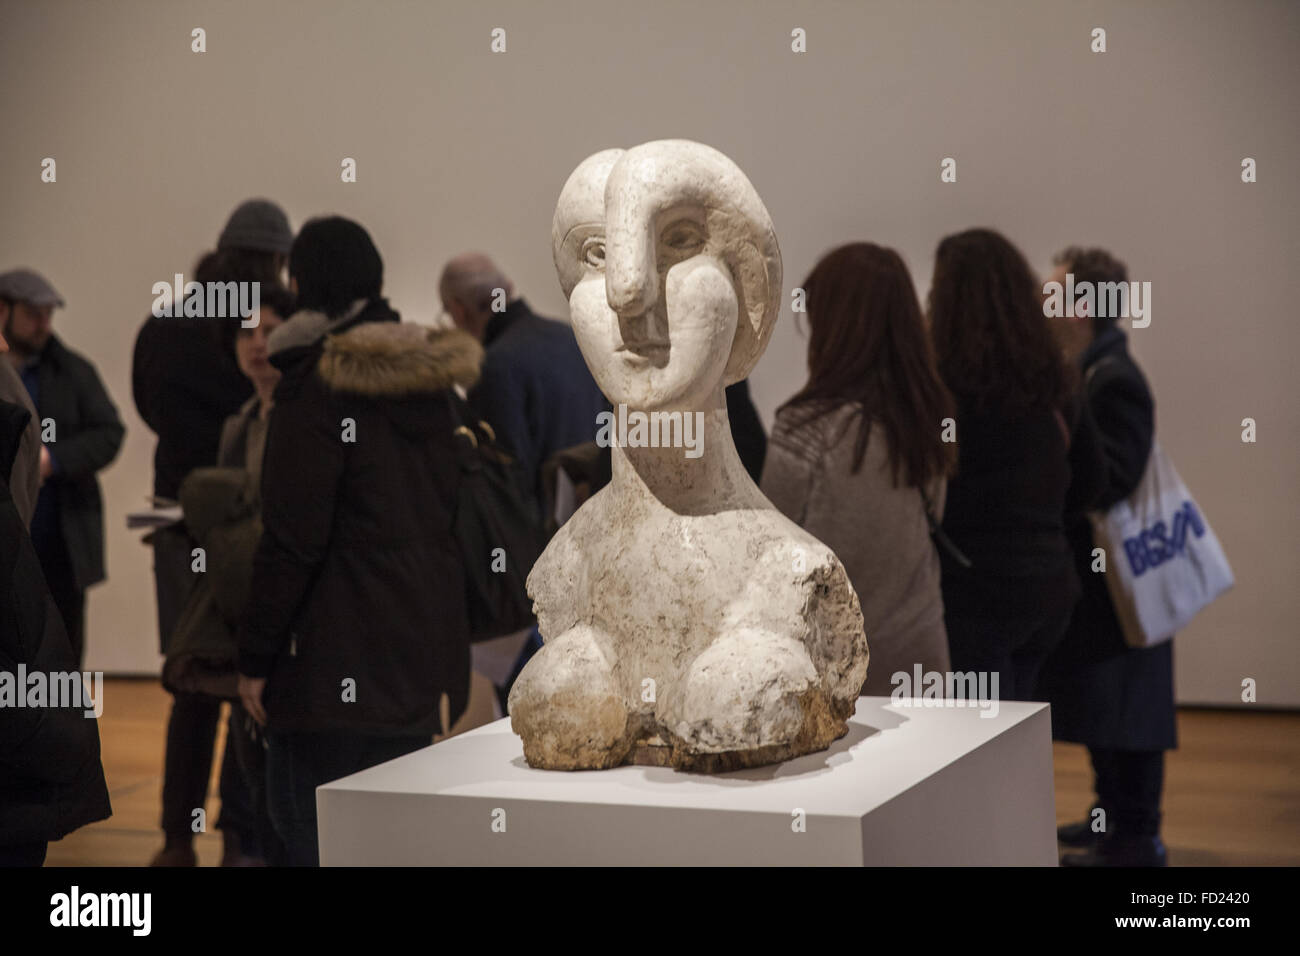 The Picasso Sculpture Exhibition at the Museum Of Modern Art in New York City has drawn record crowds. Stock Photo